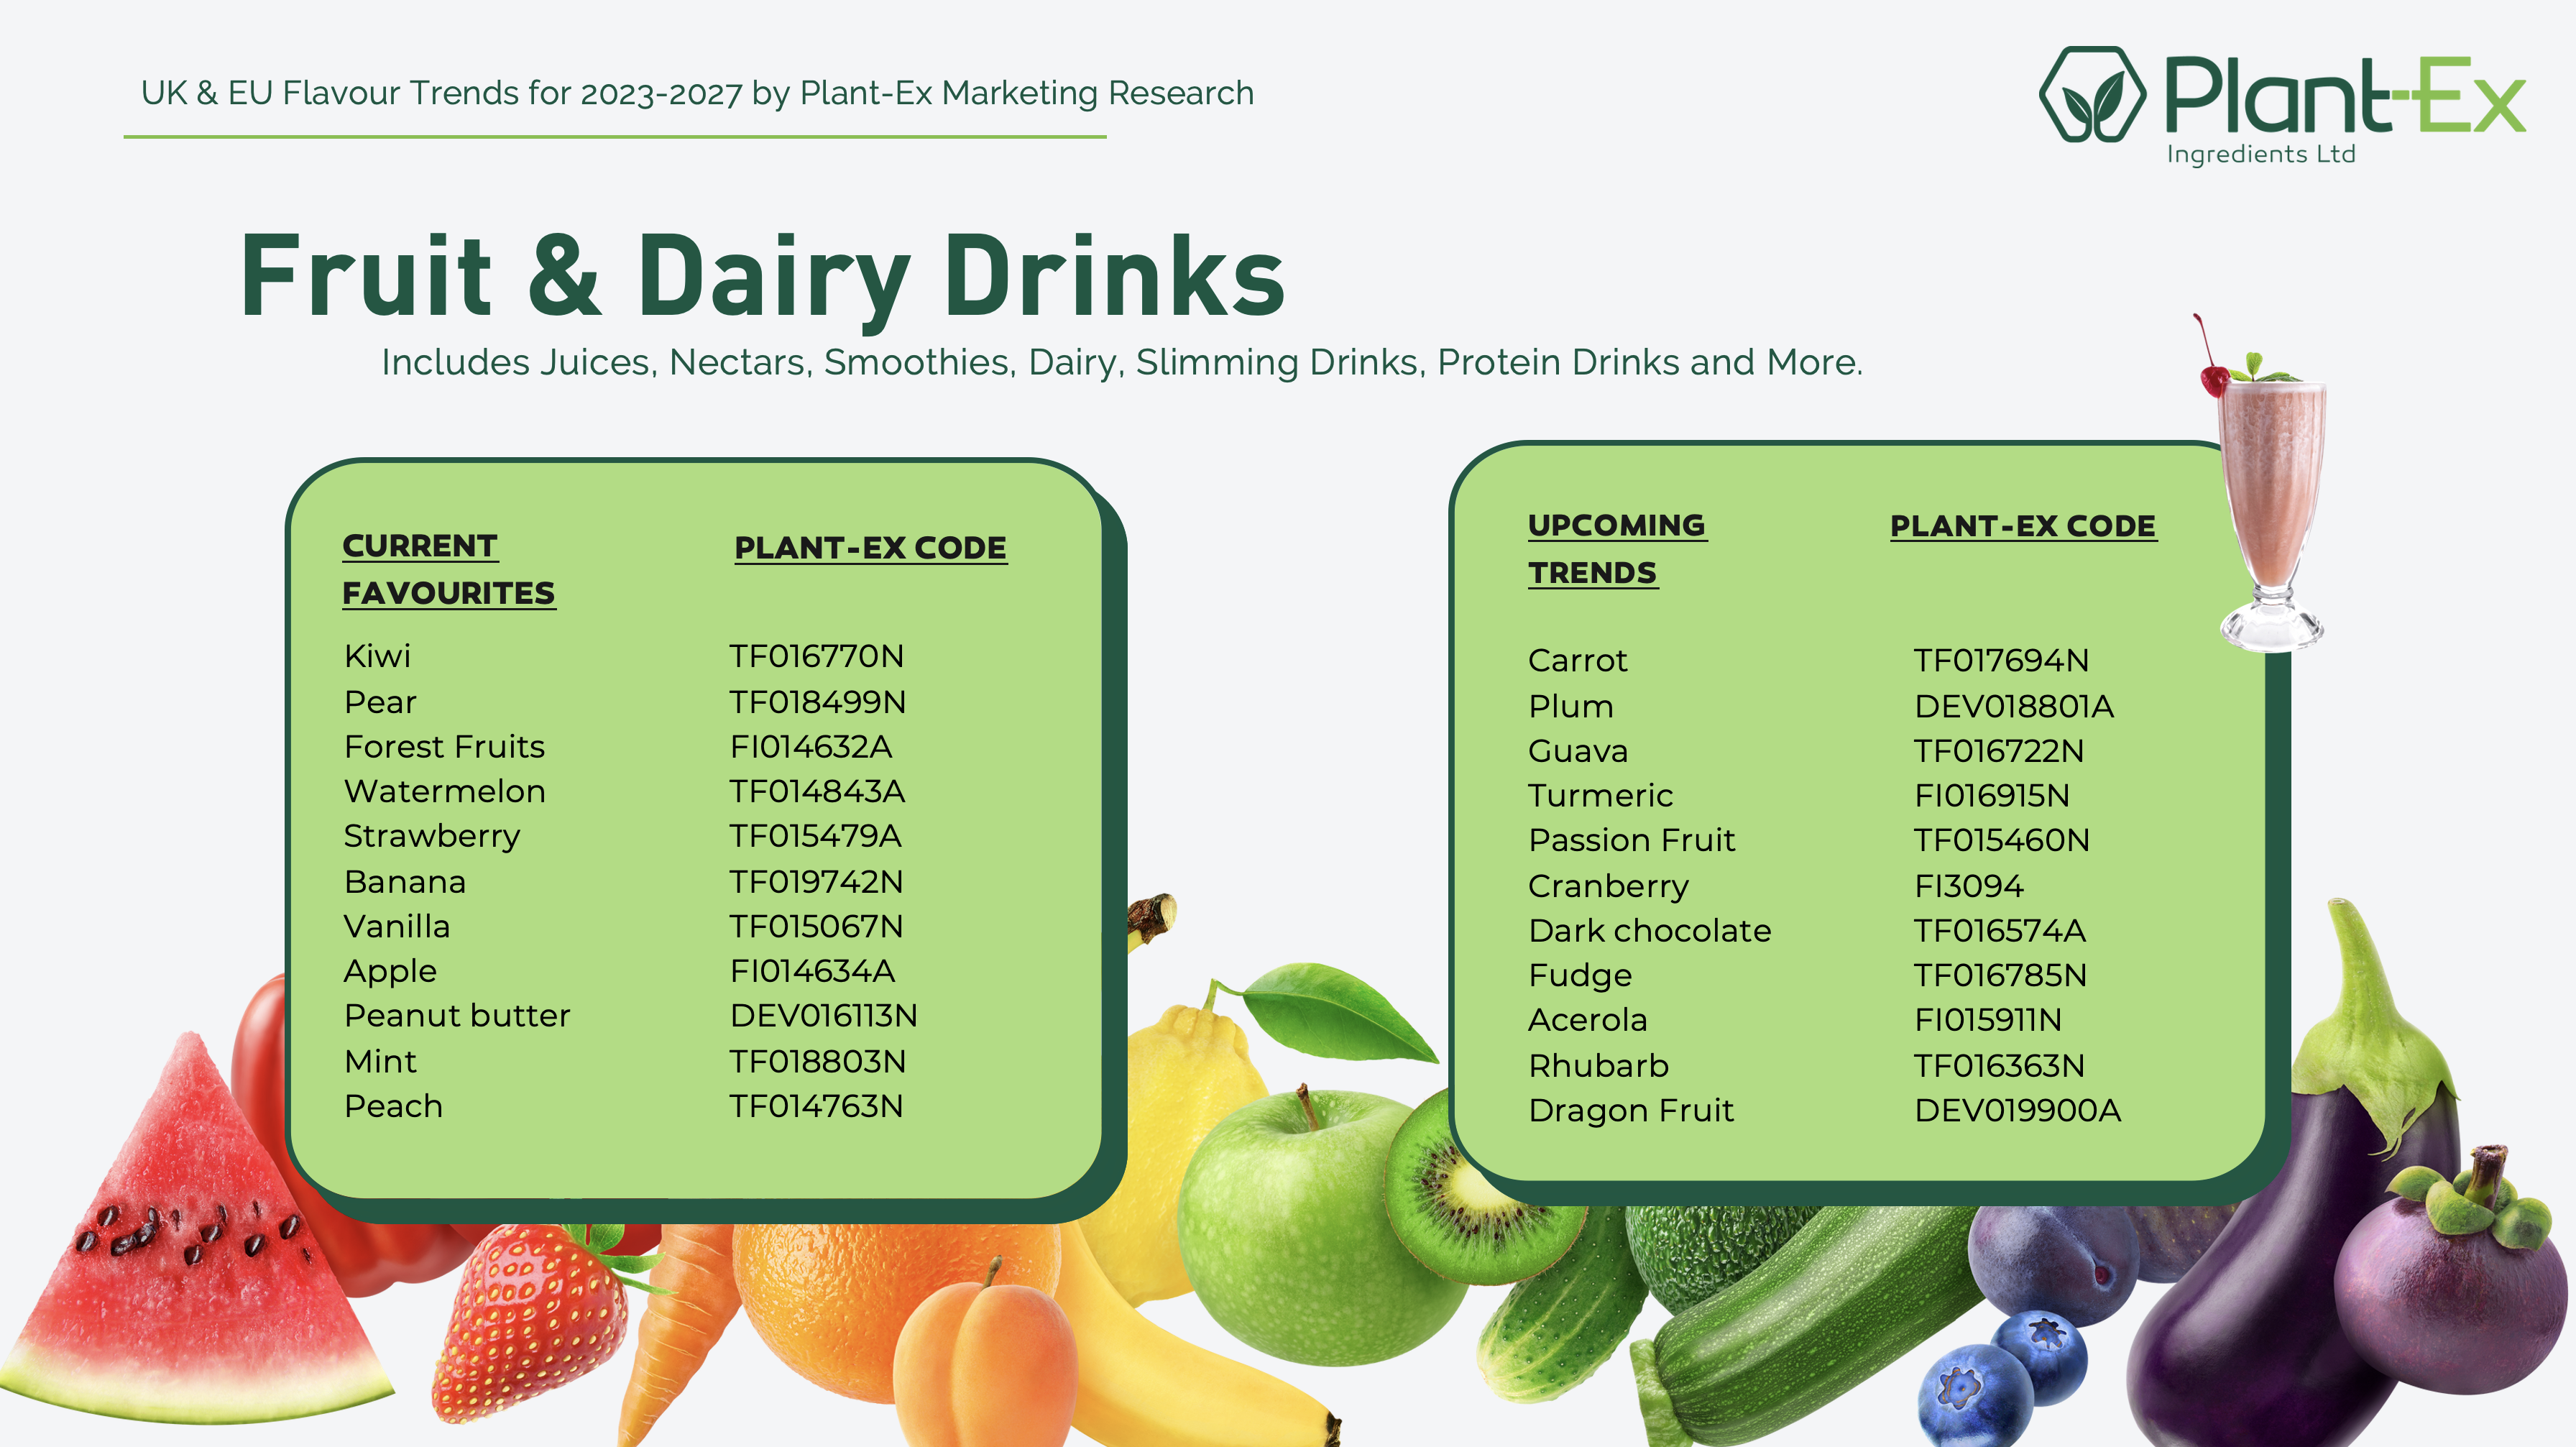 Fruit and Dairy Drinks flavour trends in EU and UK